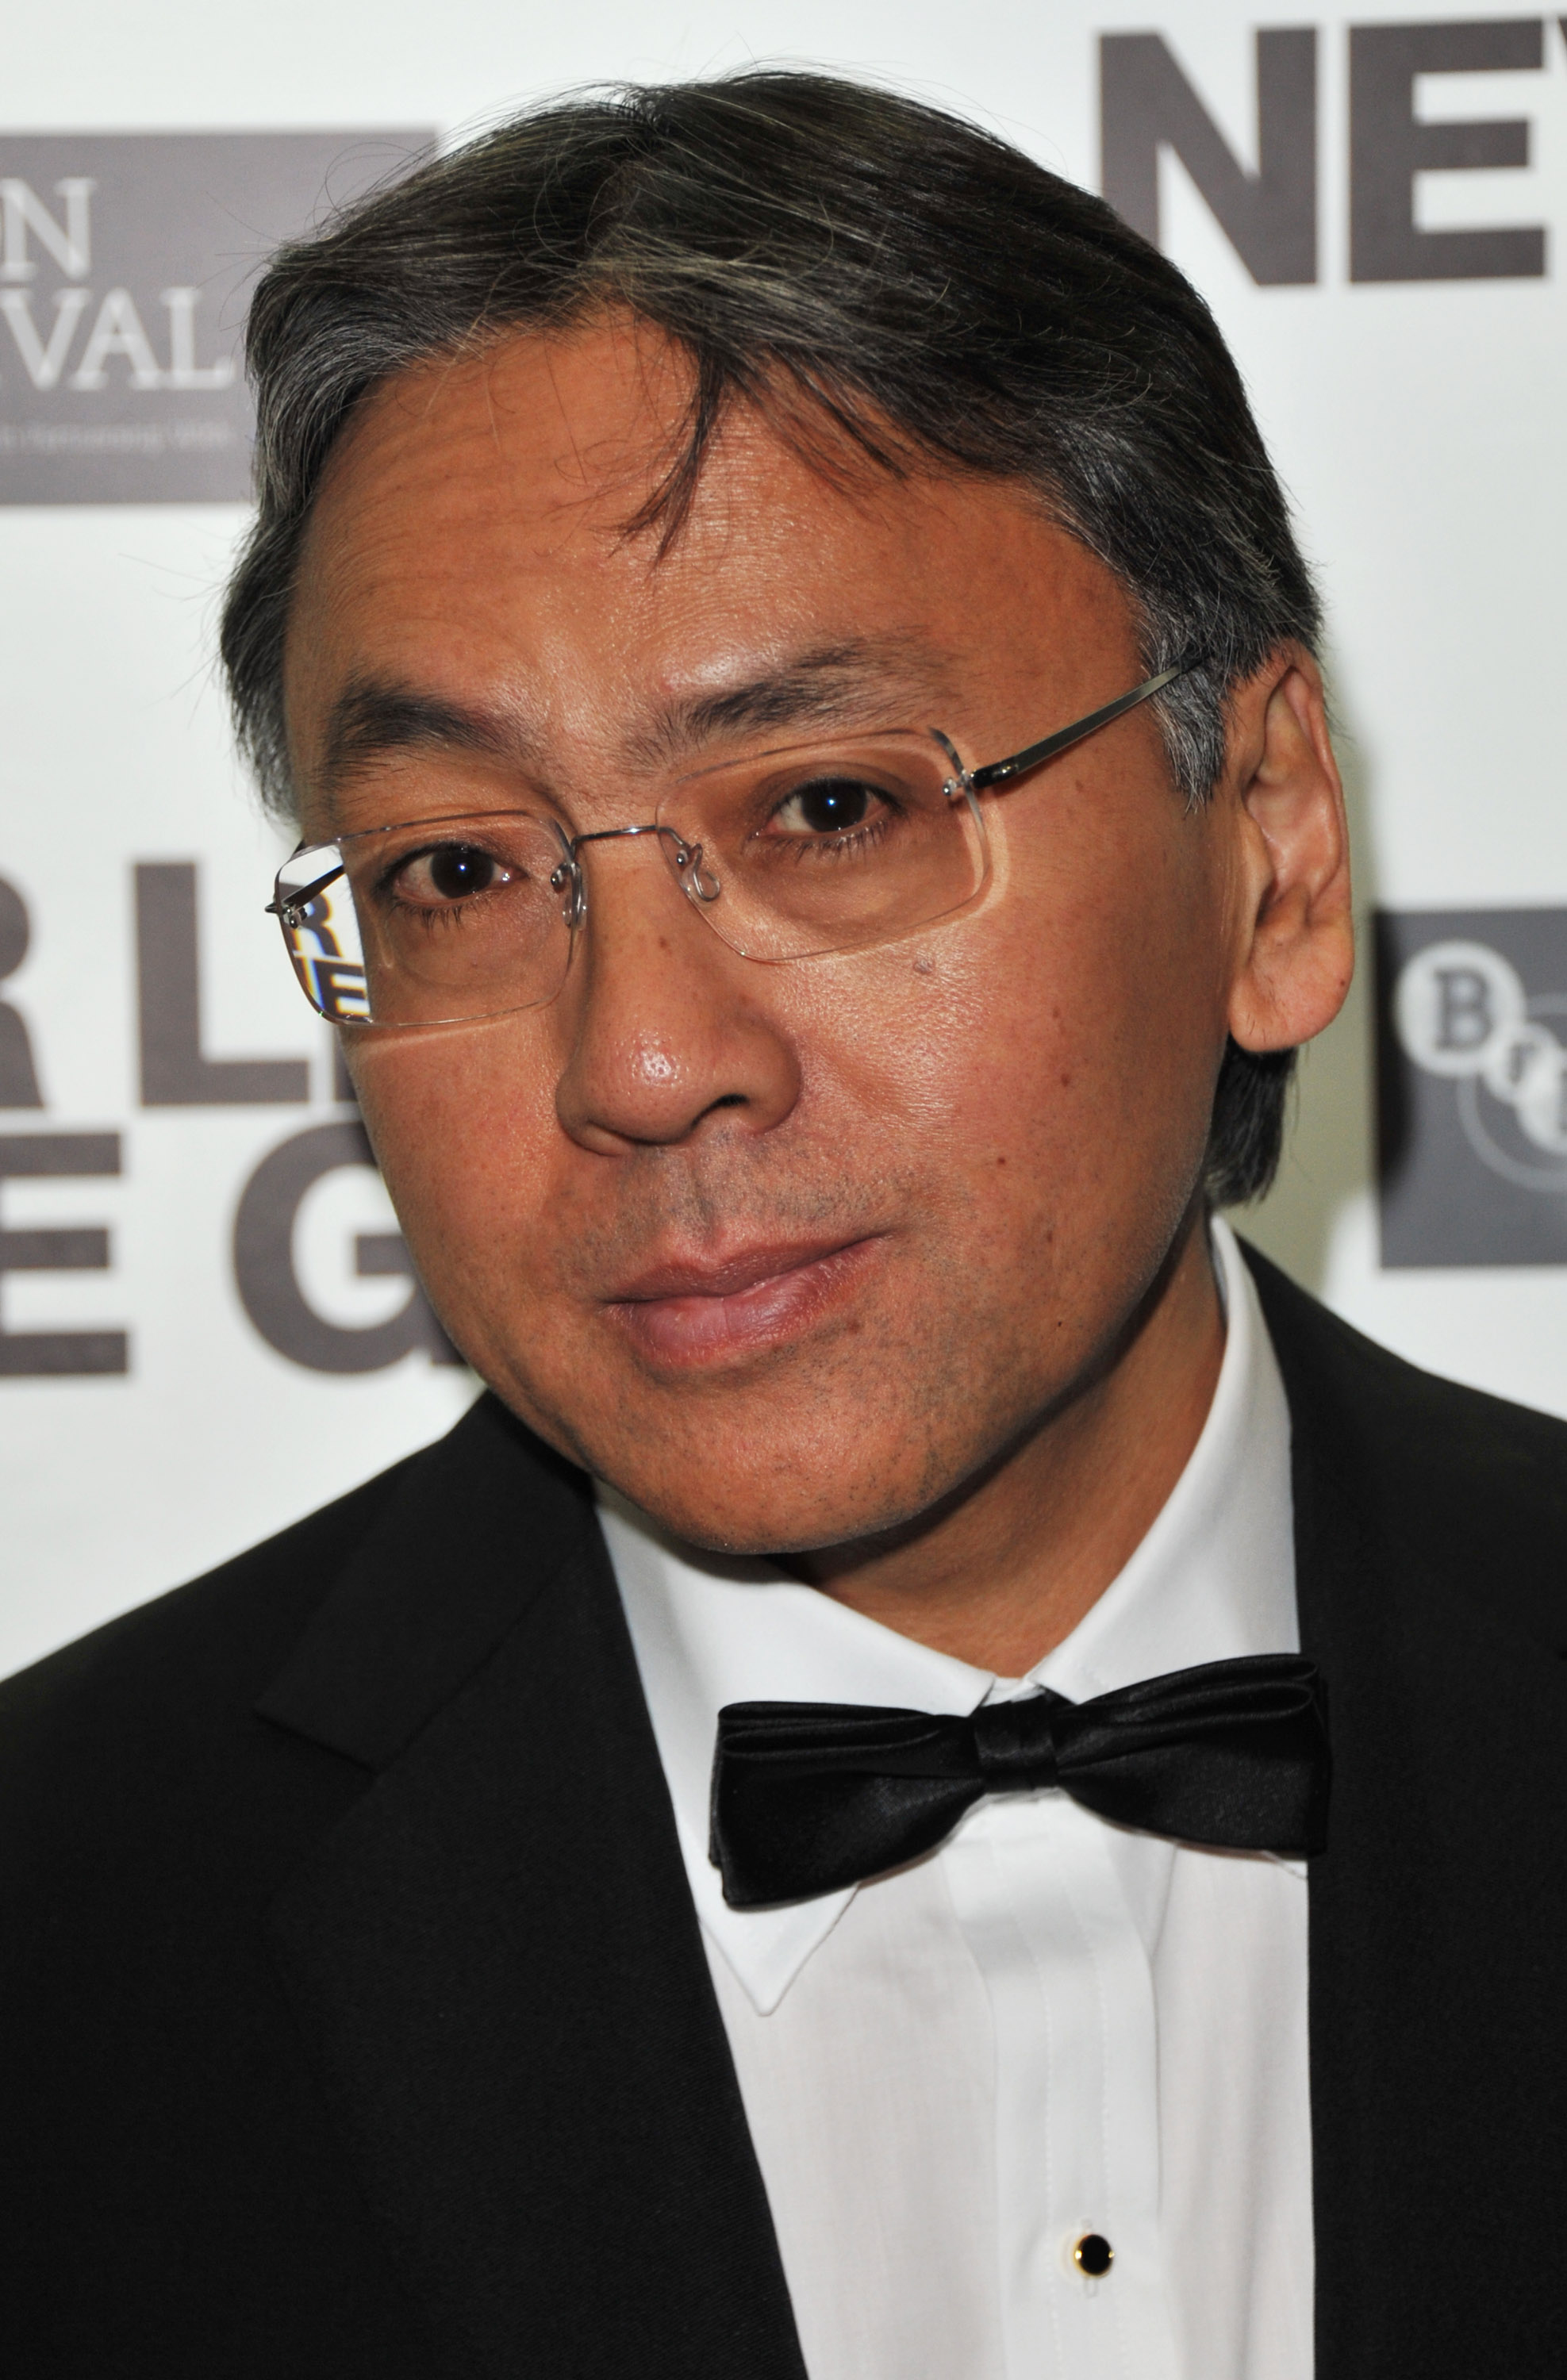 Kazuo Ishiguro attends the Never Let Me Go premiere during the 54th BFI London Film Festival after party at Saatchi Gallery on October 13, 2010 in London, England. (Jon Furniss -- WireImage)